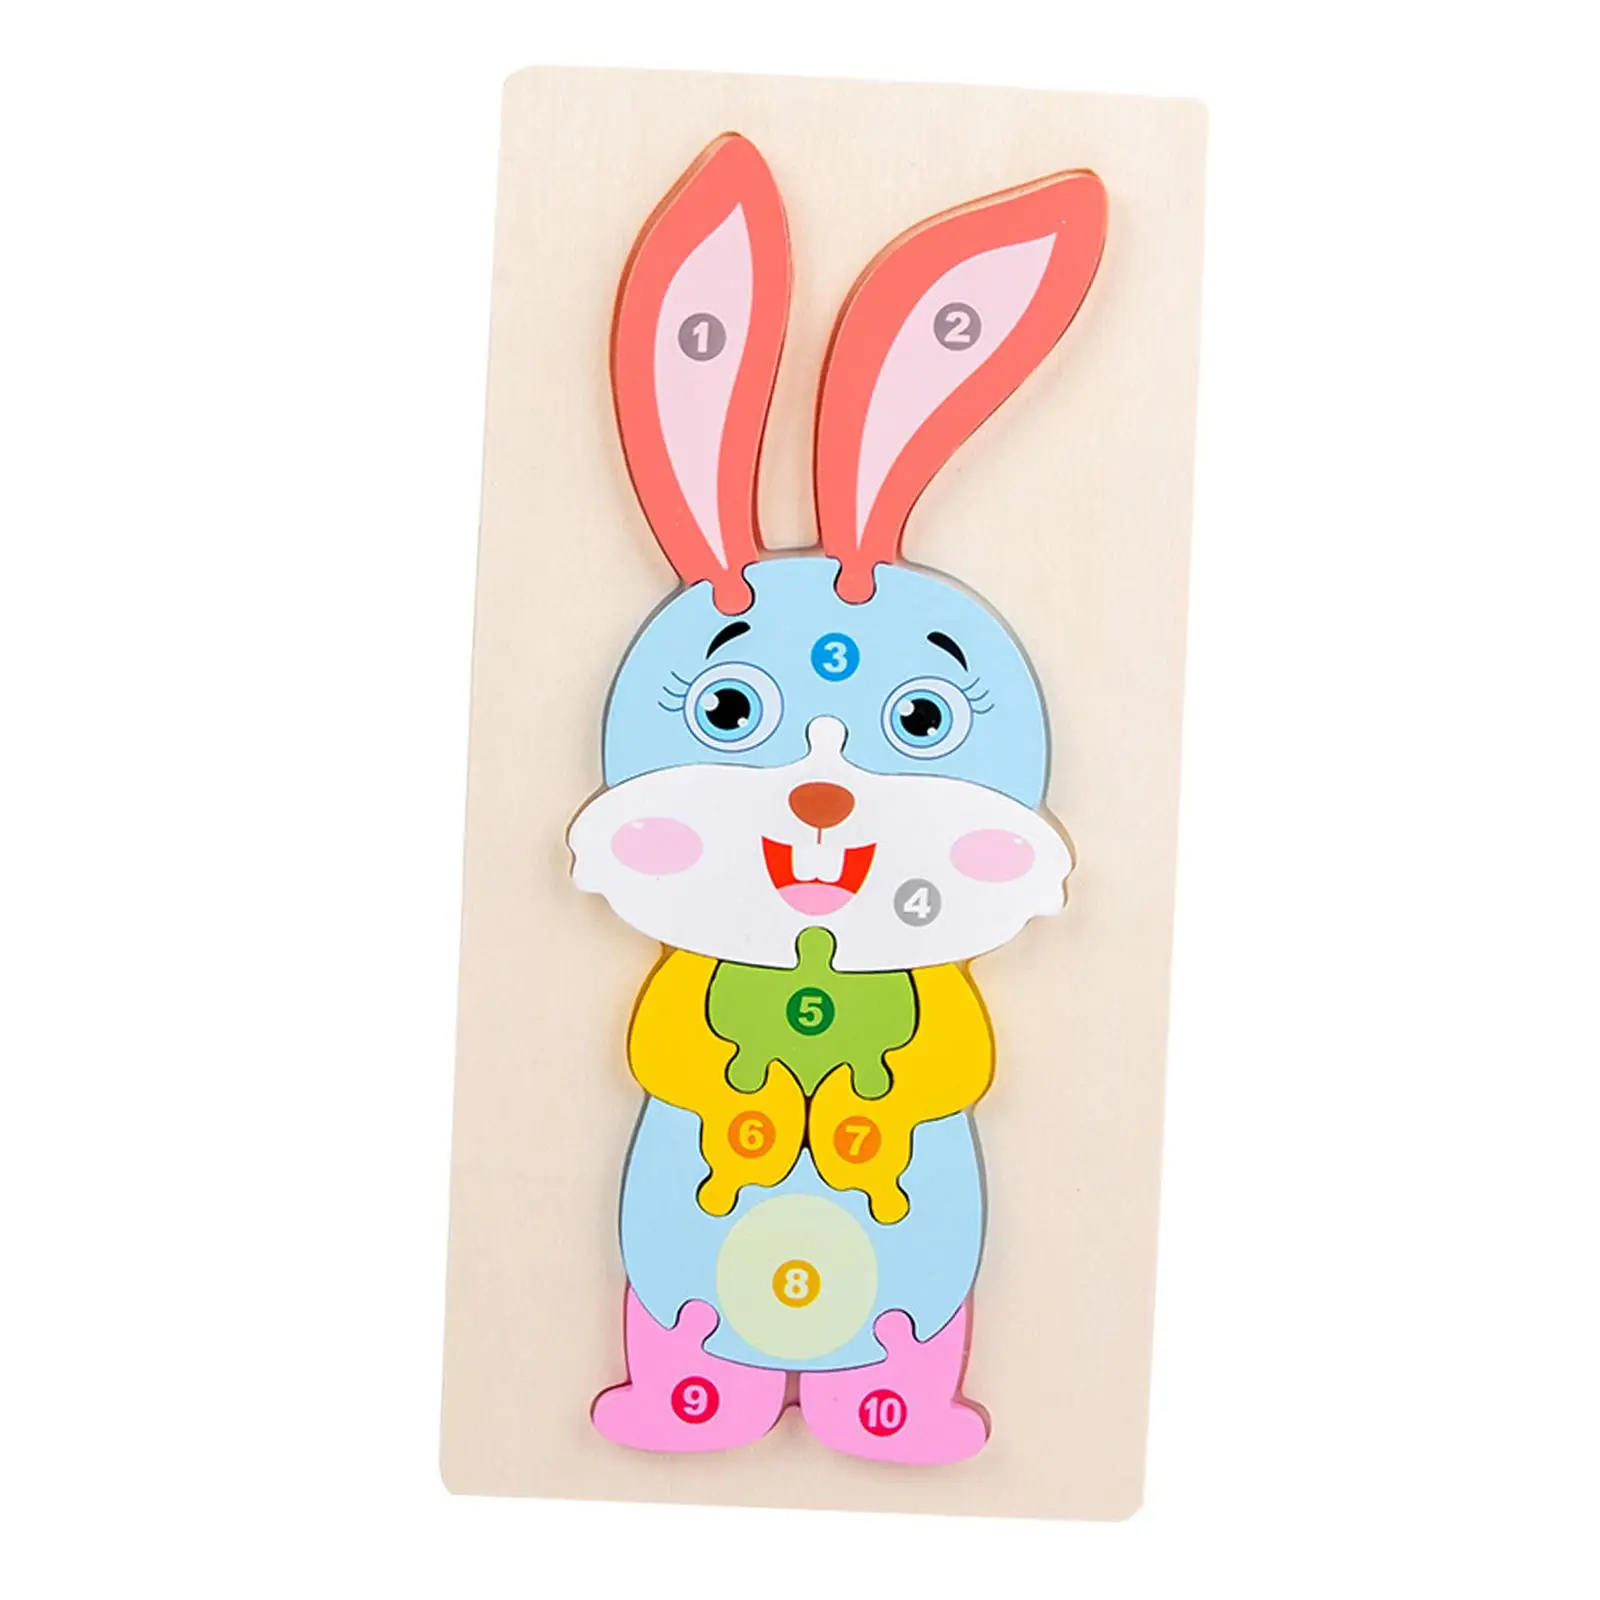 

3D Wooden Puzzle Rabbit Fine Motor Skill Animal Shape Jigsaw Montessori Puzzle for Boys Girls Ages 2 3 4 Year Old Kids Preschool